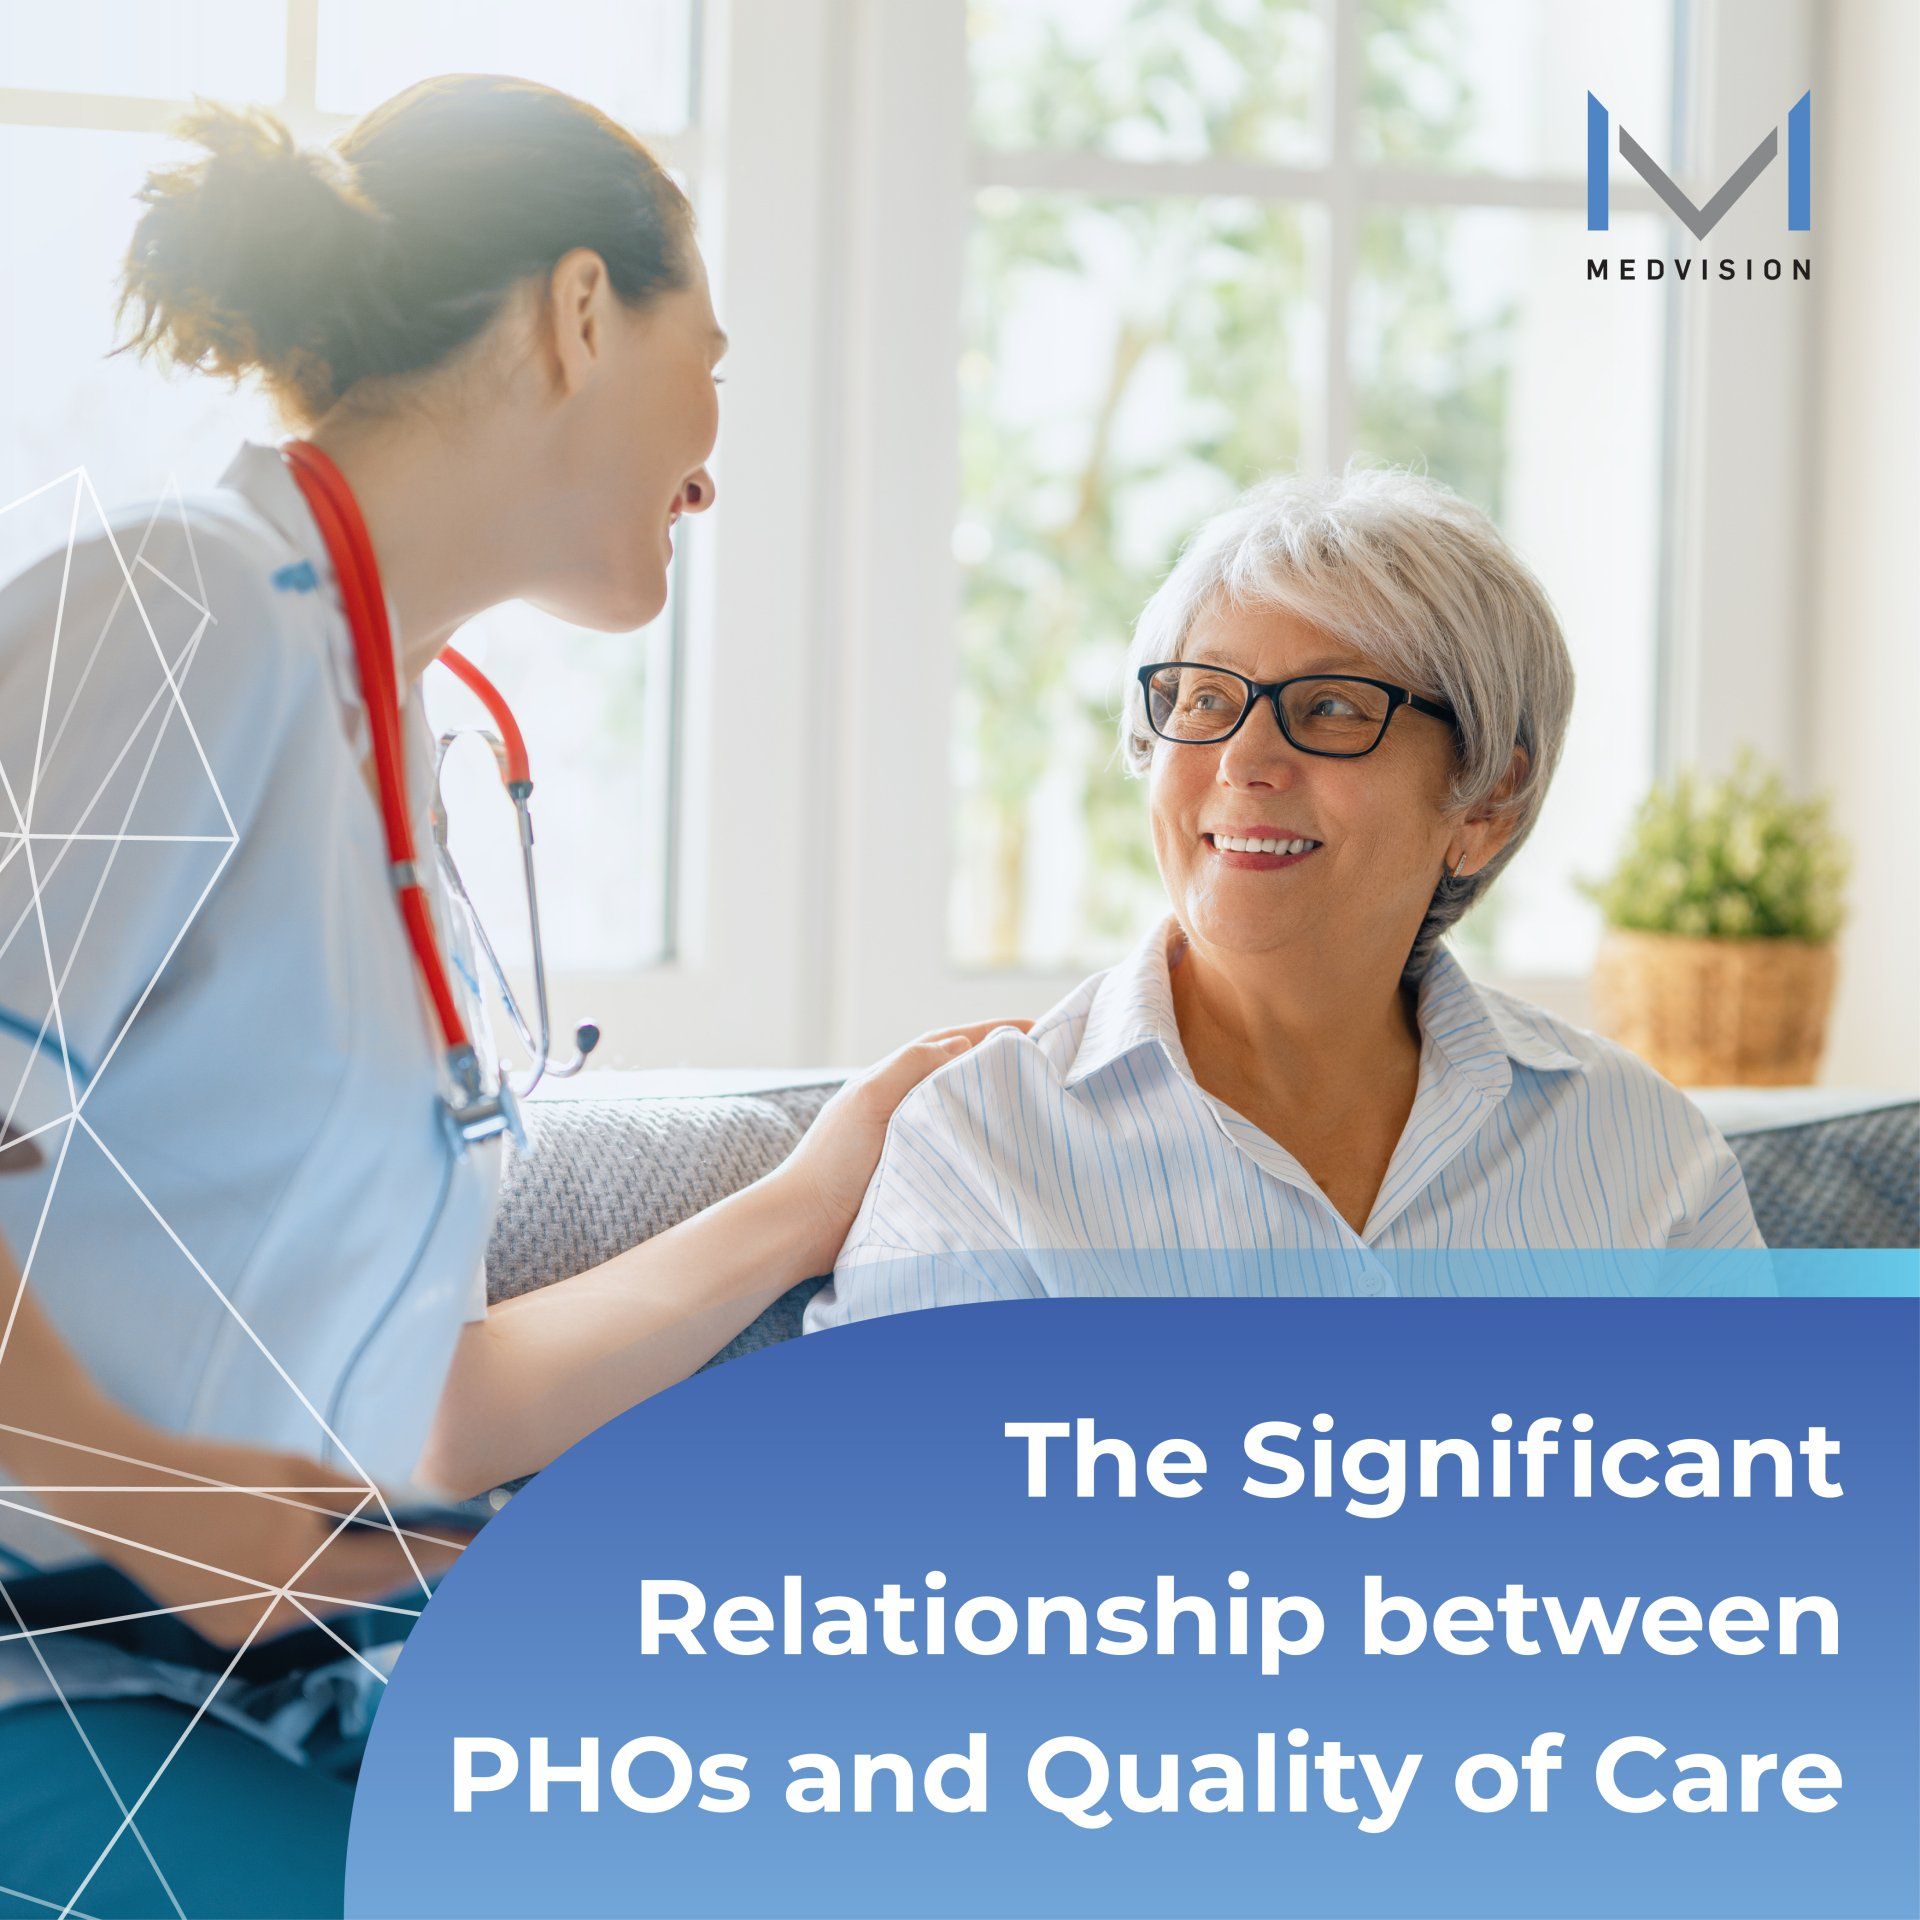 The Significant Relationship between PHOs and Quality of Care